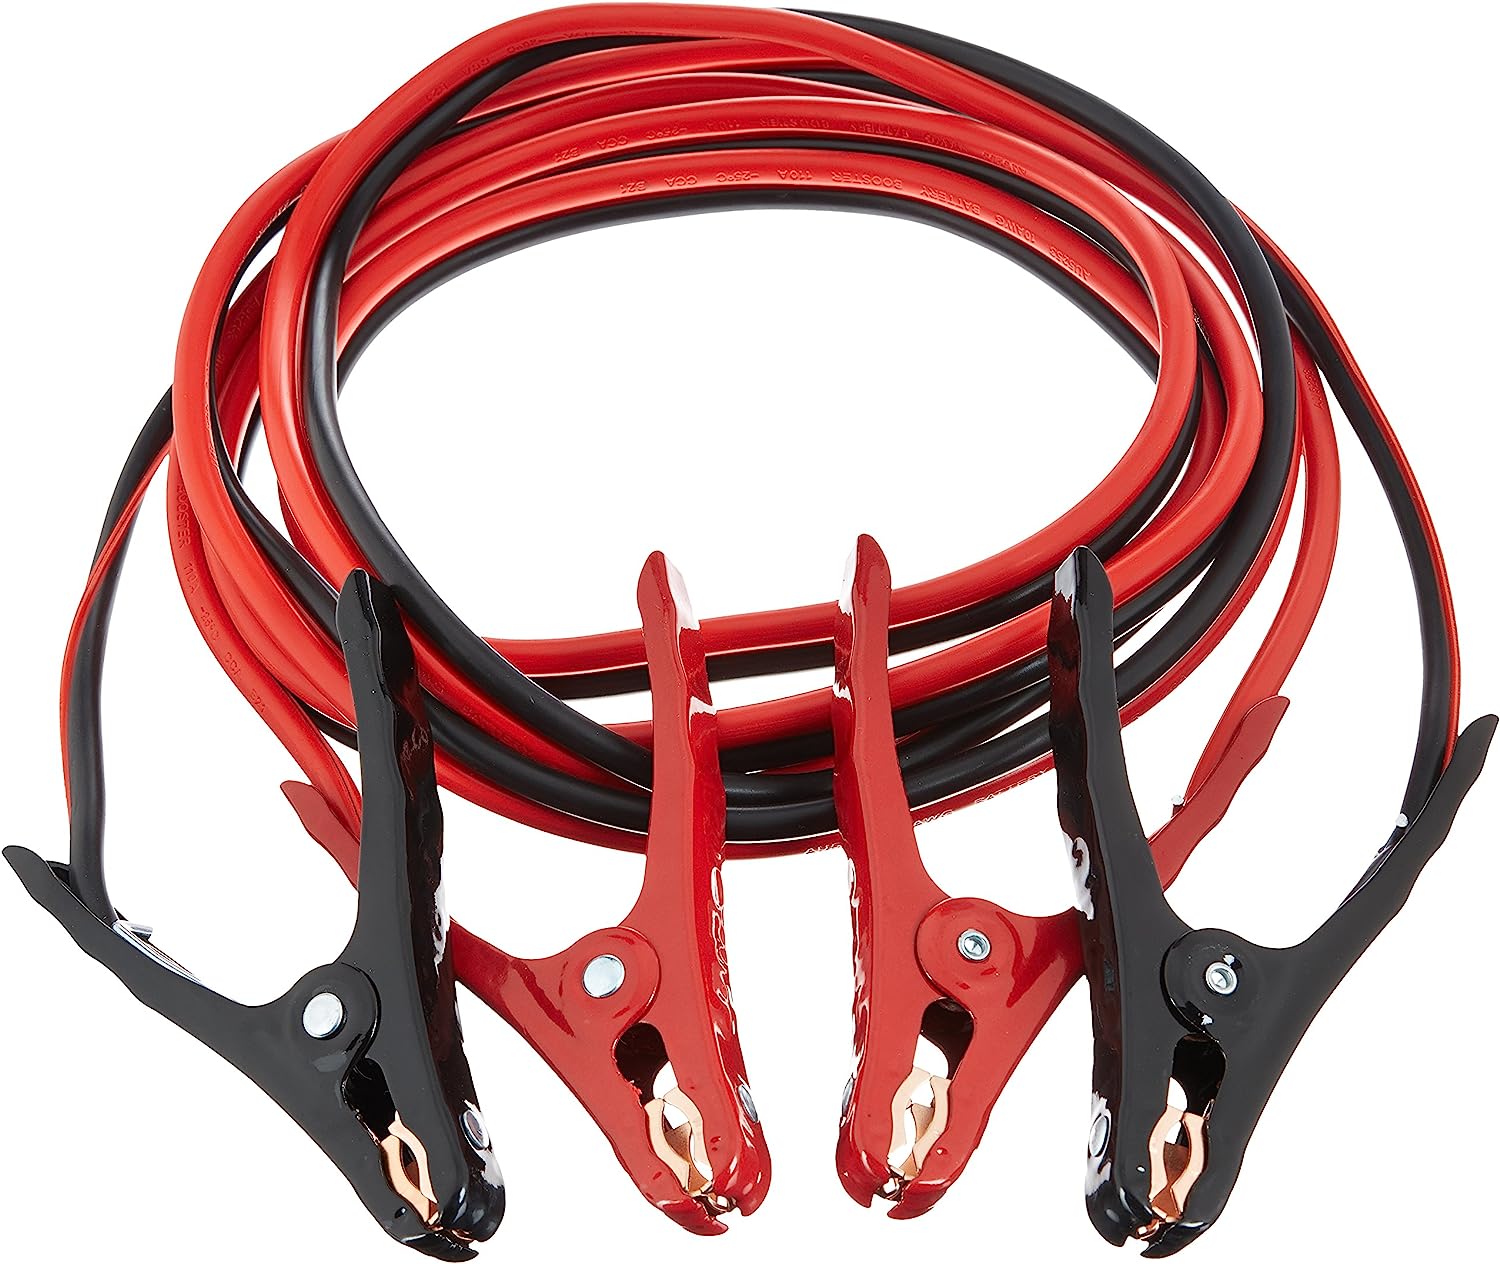 Amazon Basics Jumper Cable for Car Battery, 10 Gauge, [...]